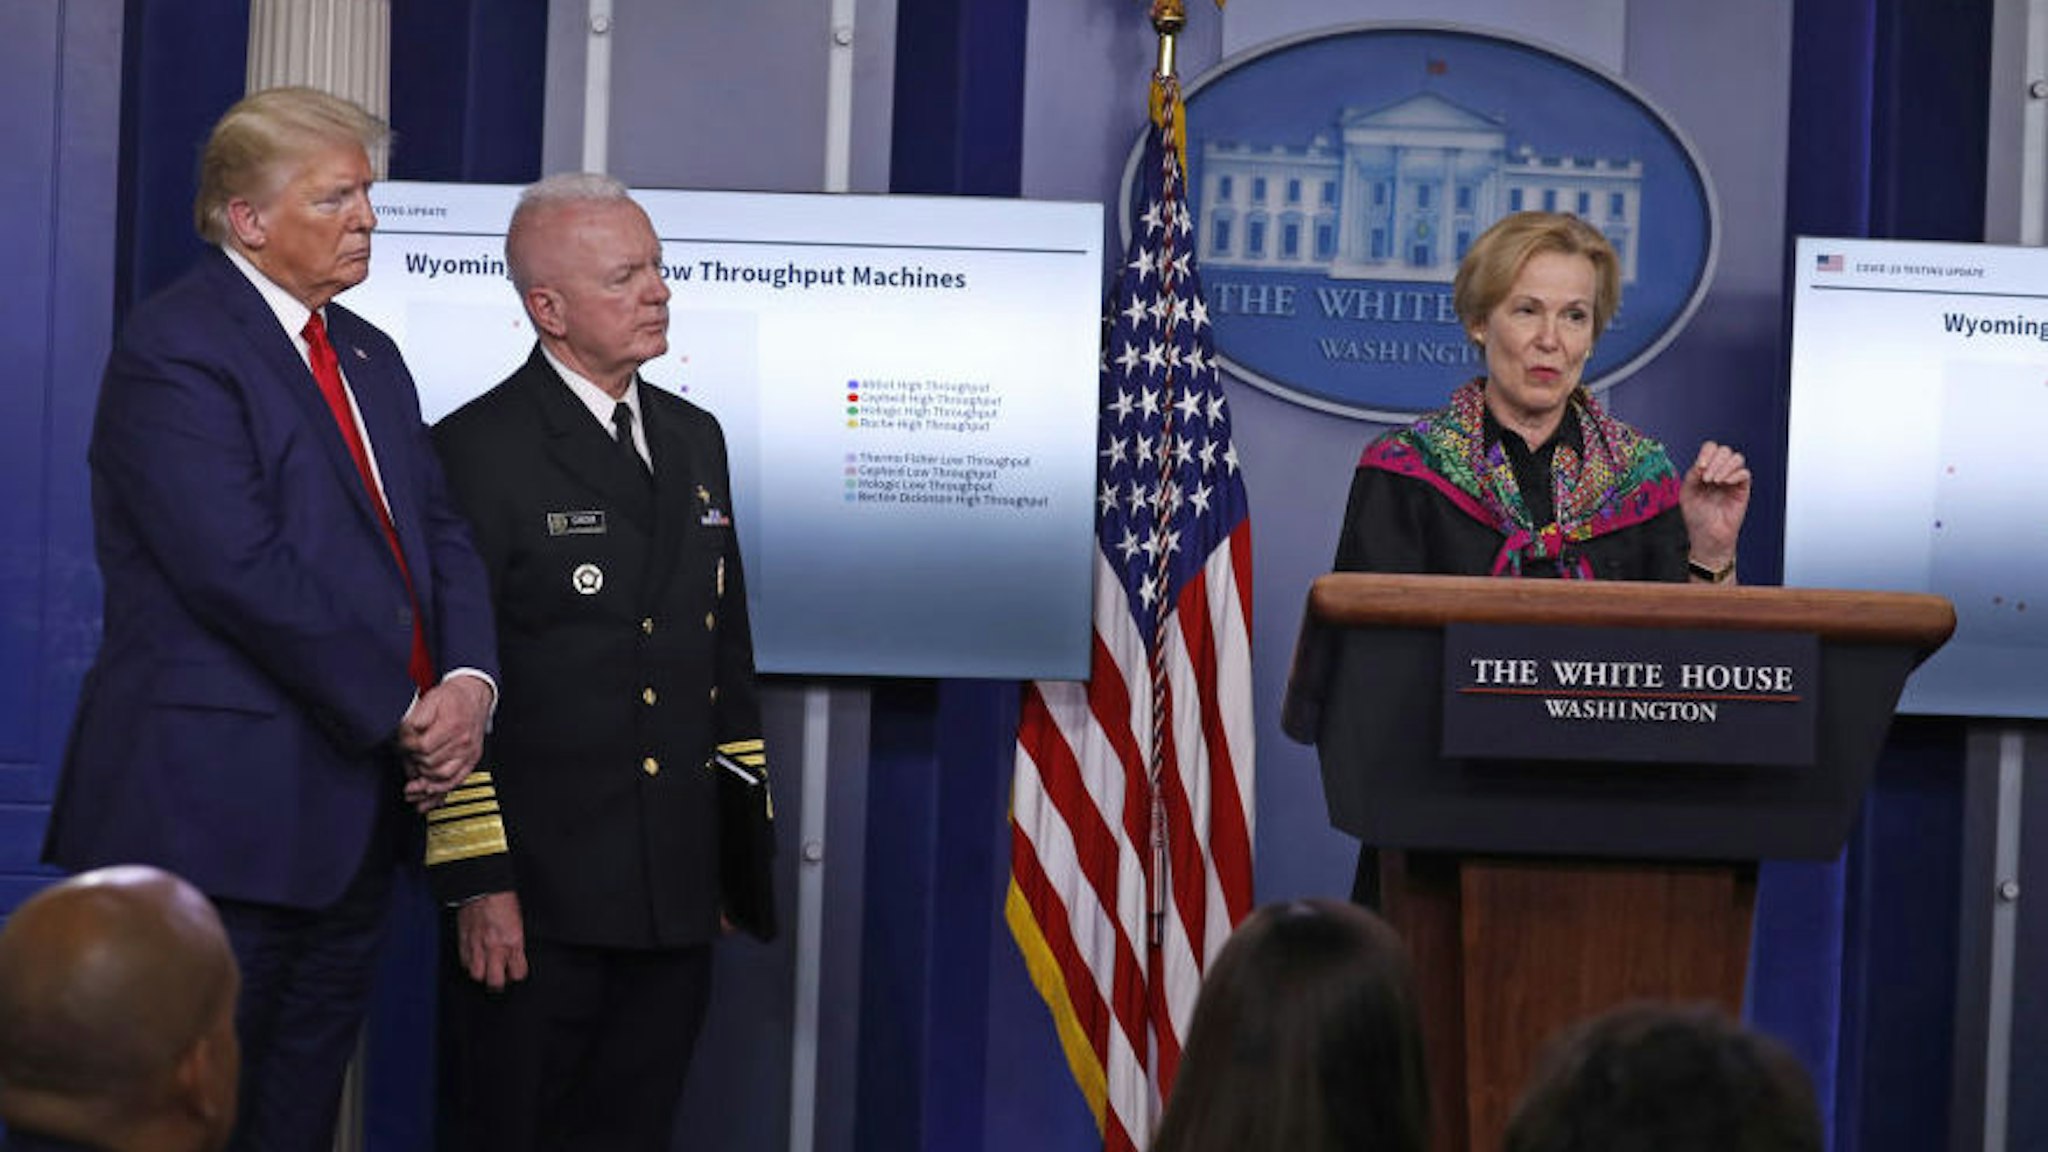 Deborah Birx, coronavirus response coordinator, speaks as U.S. President Donald Trump, left, and Brett Giroir, U.S. assistant secretary for health, second left, listen during a news conference at the White House in Washington D.C., U.S. on Monday, April 20, 2020. Negotiations between Democrats and the Trump administration on a deal to replenish a small business aid program and assist hospitals spilled into Monday as both sides raced to put together a package that Congress could approve this week. Photographer: Tasos Katopodis/Bloomberg